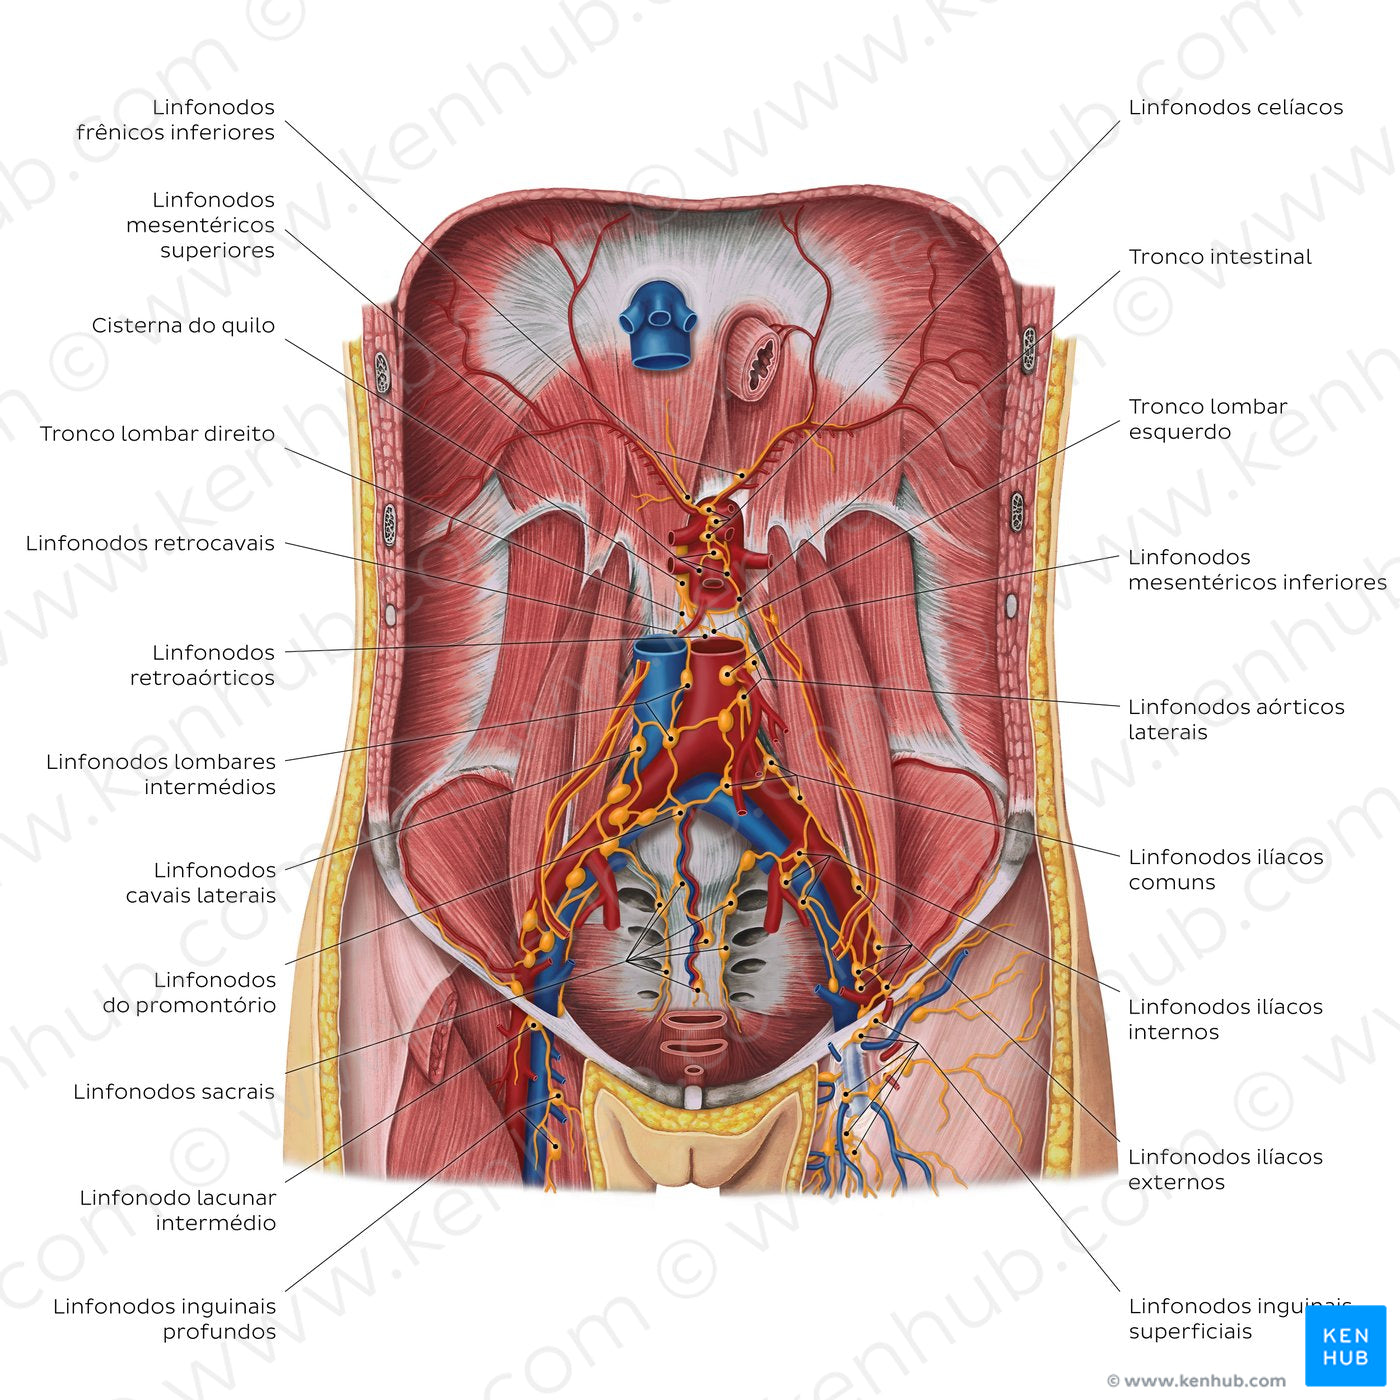 Lymphatics of the posterior abdominal wall (Portuguese)